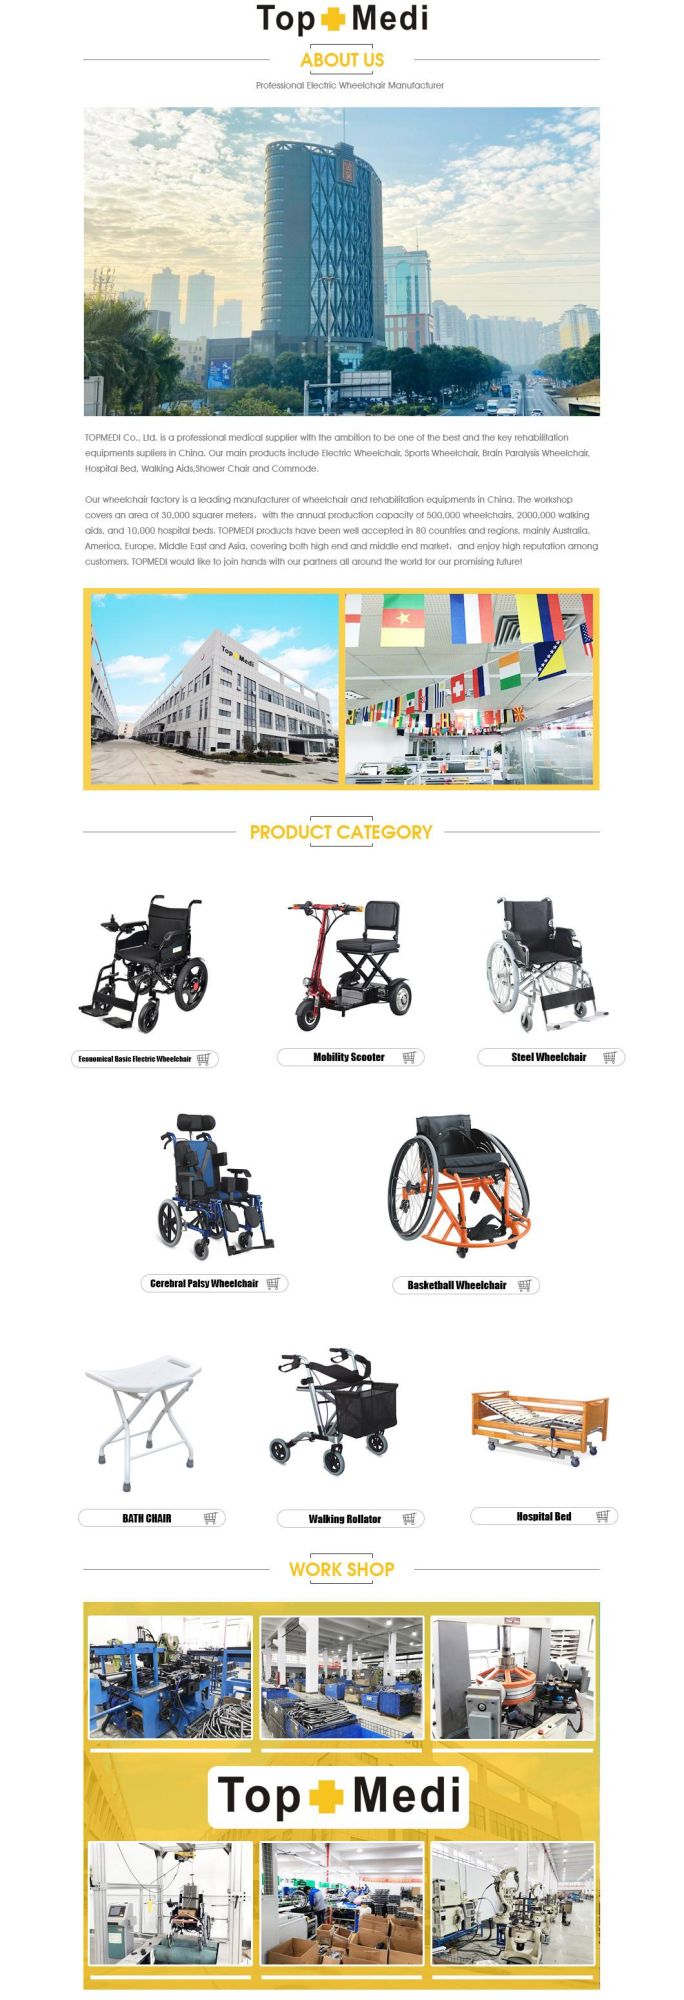 2022 Hot Selling Light Wheelchair Foldable Aluminum Alloy Electric Wheelchair